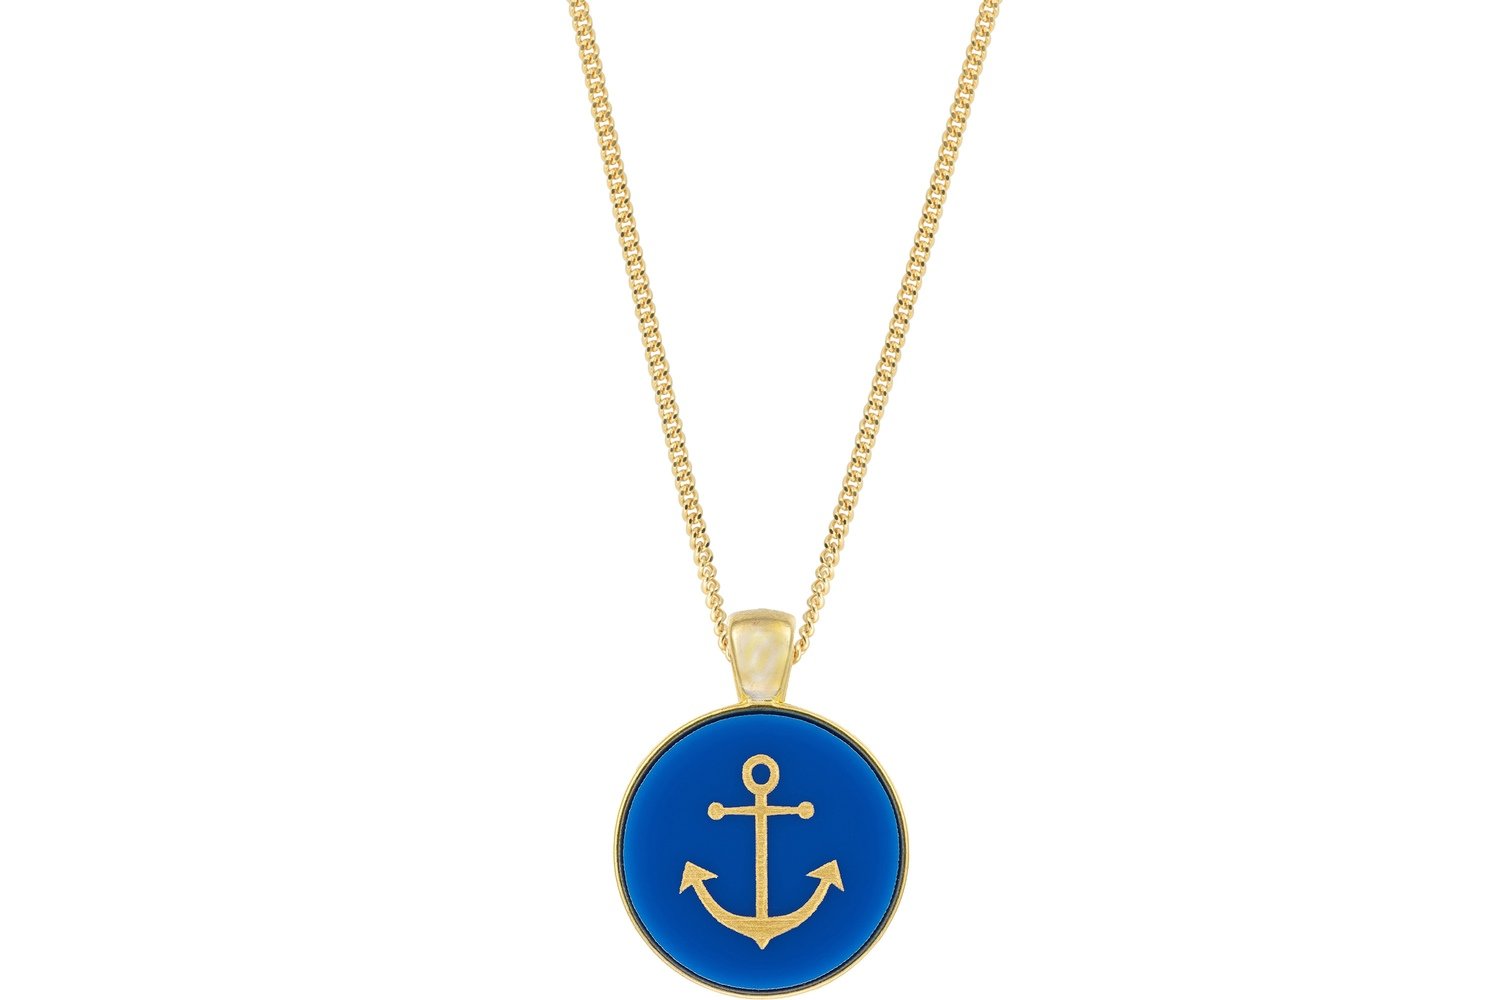 Anchor Pendant Classic Style with Bezel on Chain Necklace